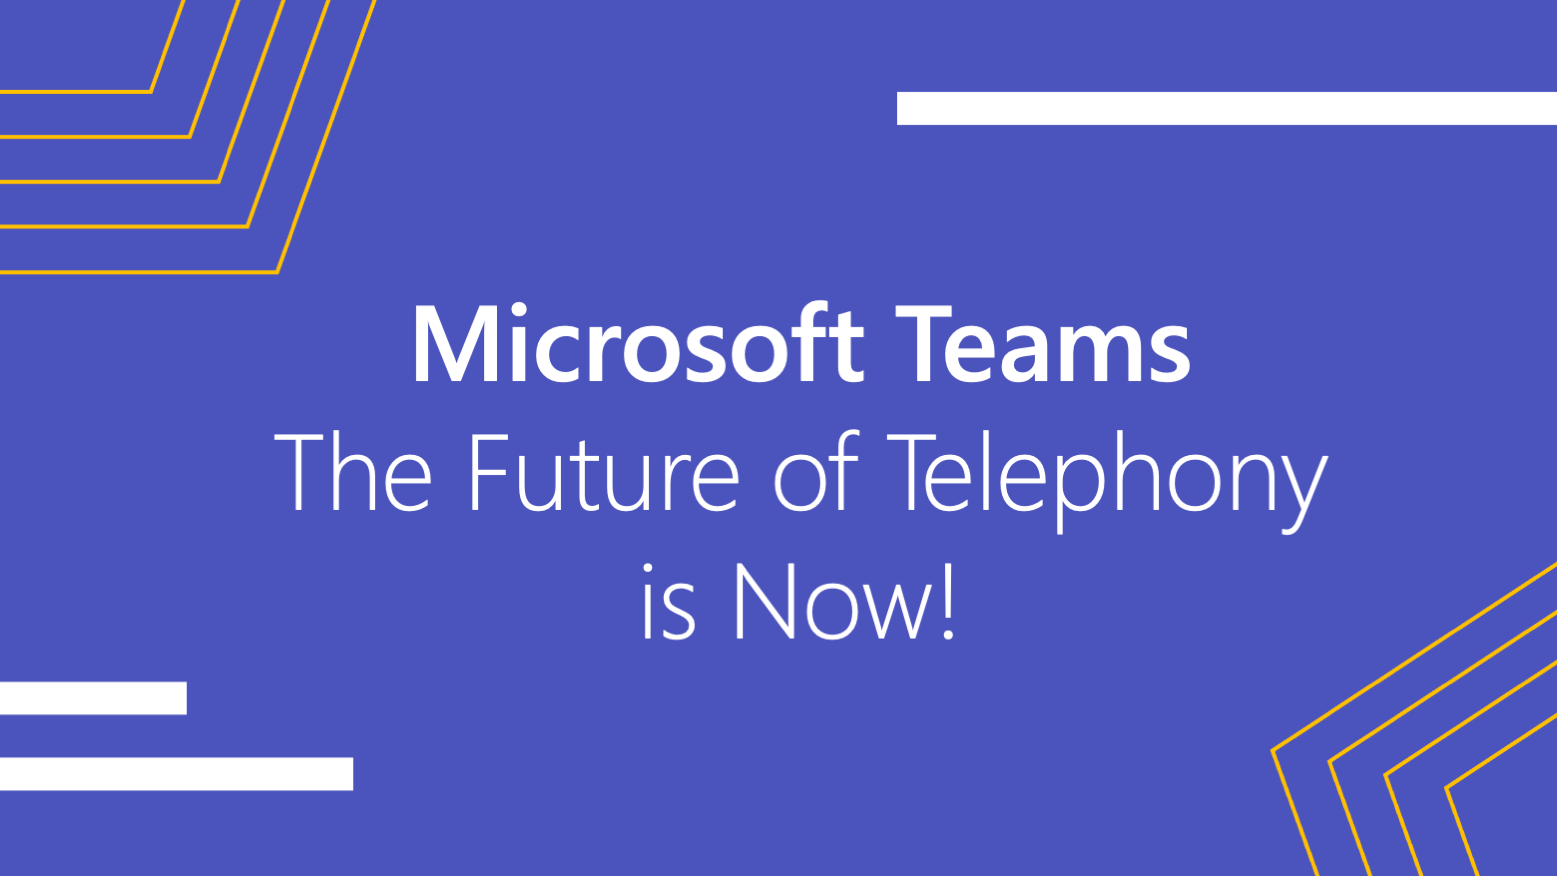 Webinar Recording: Microsoft Teams – The Future of Telephony is Now!